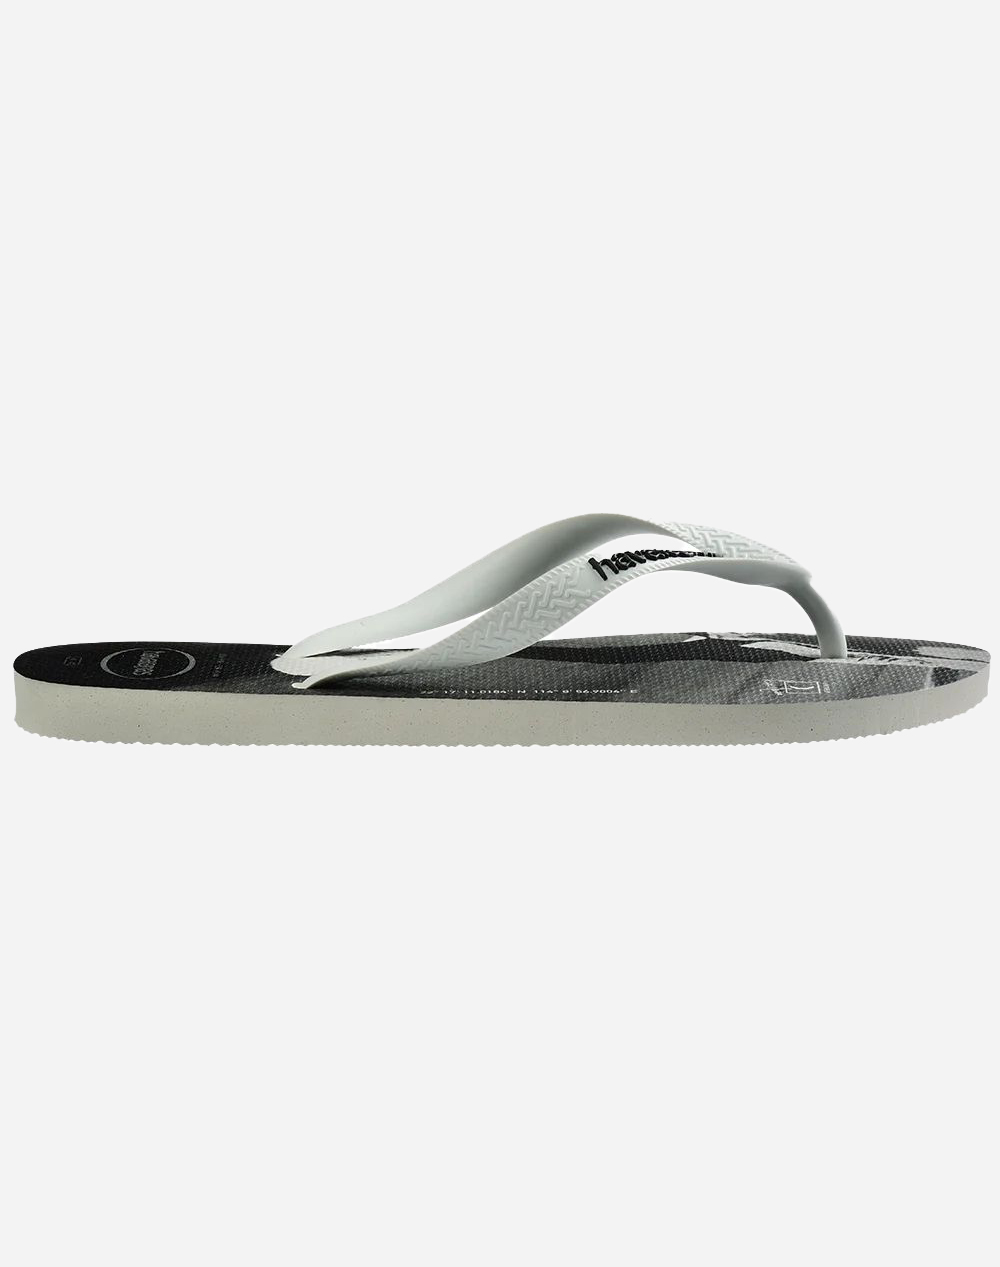 HAVAIANAS HYPE ΣΑΓΙΟΝΑΡΕΣ 4127920-2594 Mixed